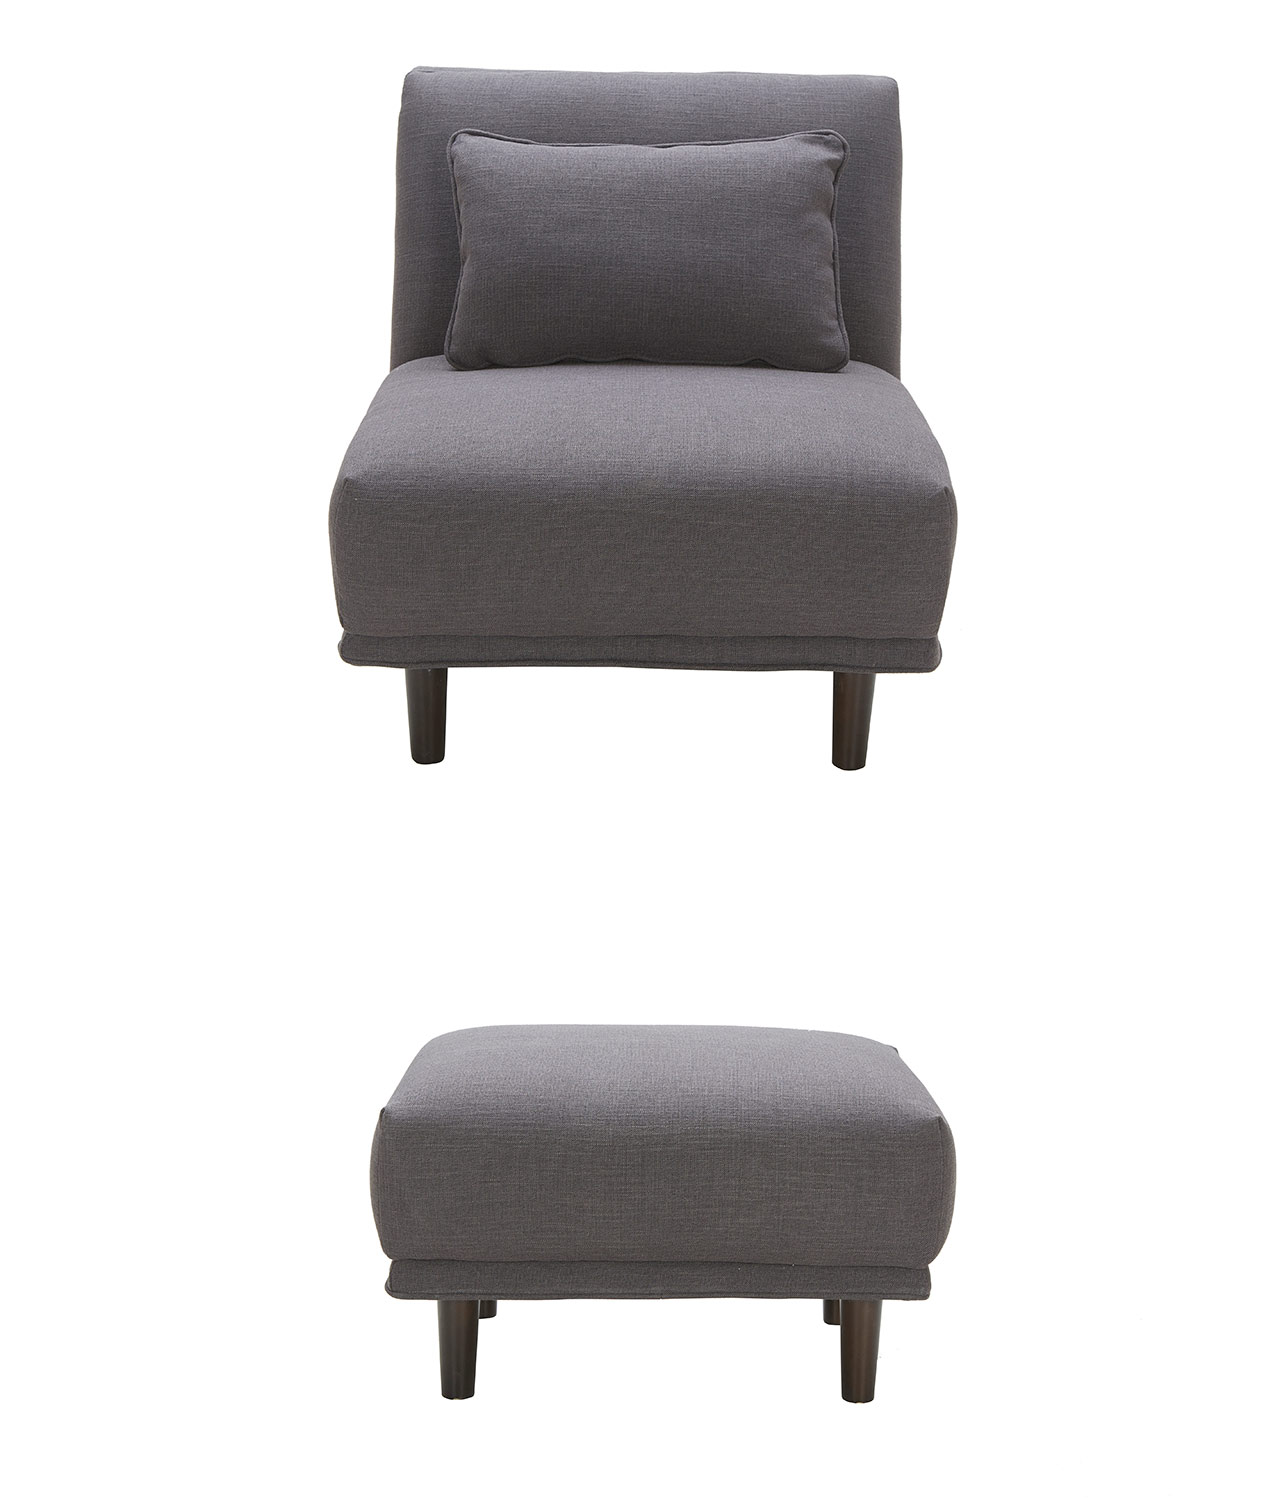 ELEMENTS Fine Home Furnishings Manhattan 2-Piece Set Including Armless Chair and Ottoman - Concrete